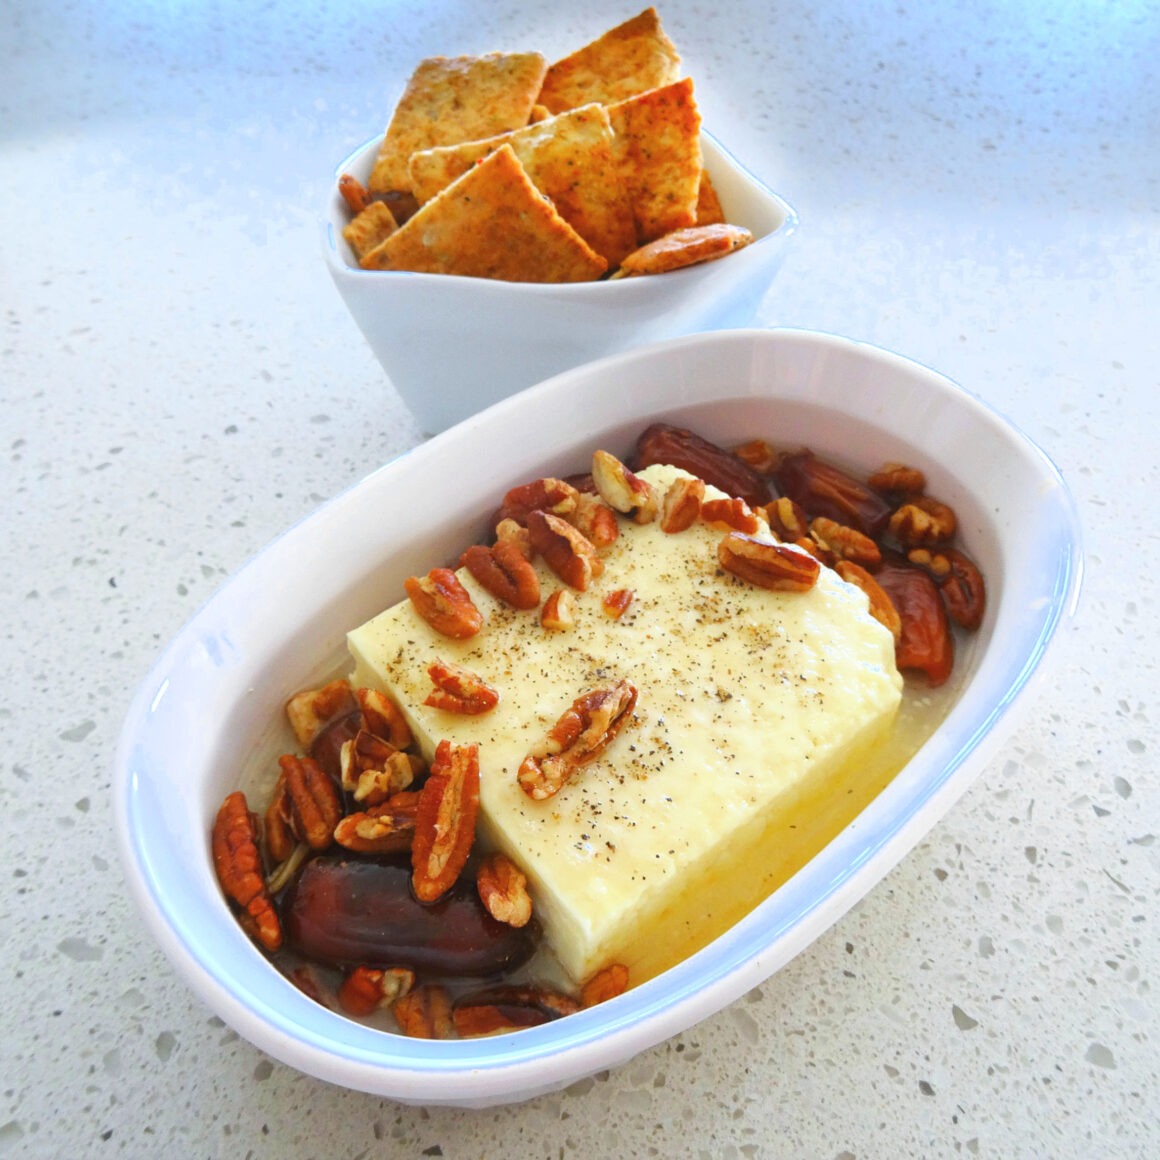 Baked Feta Appetizer by Champagne and Sugarplums